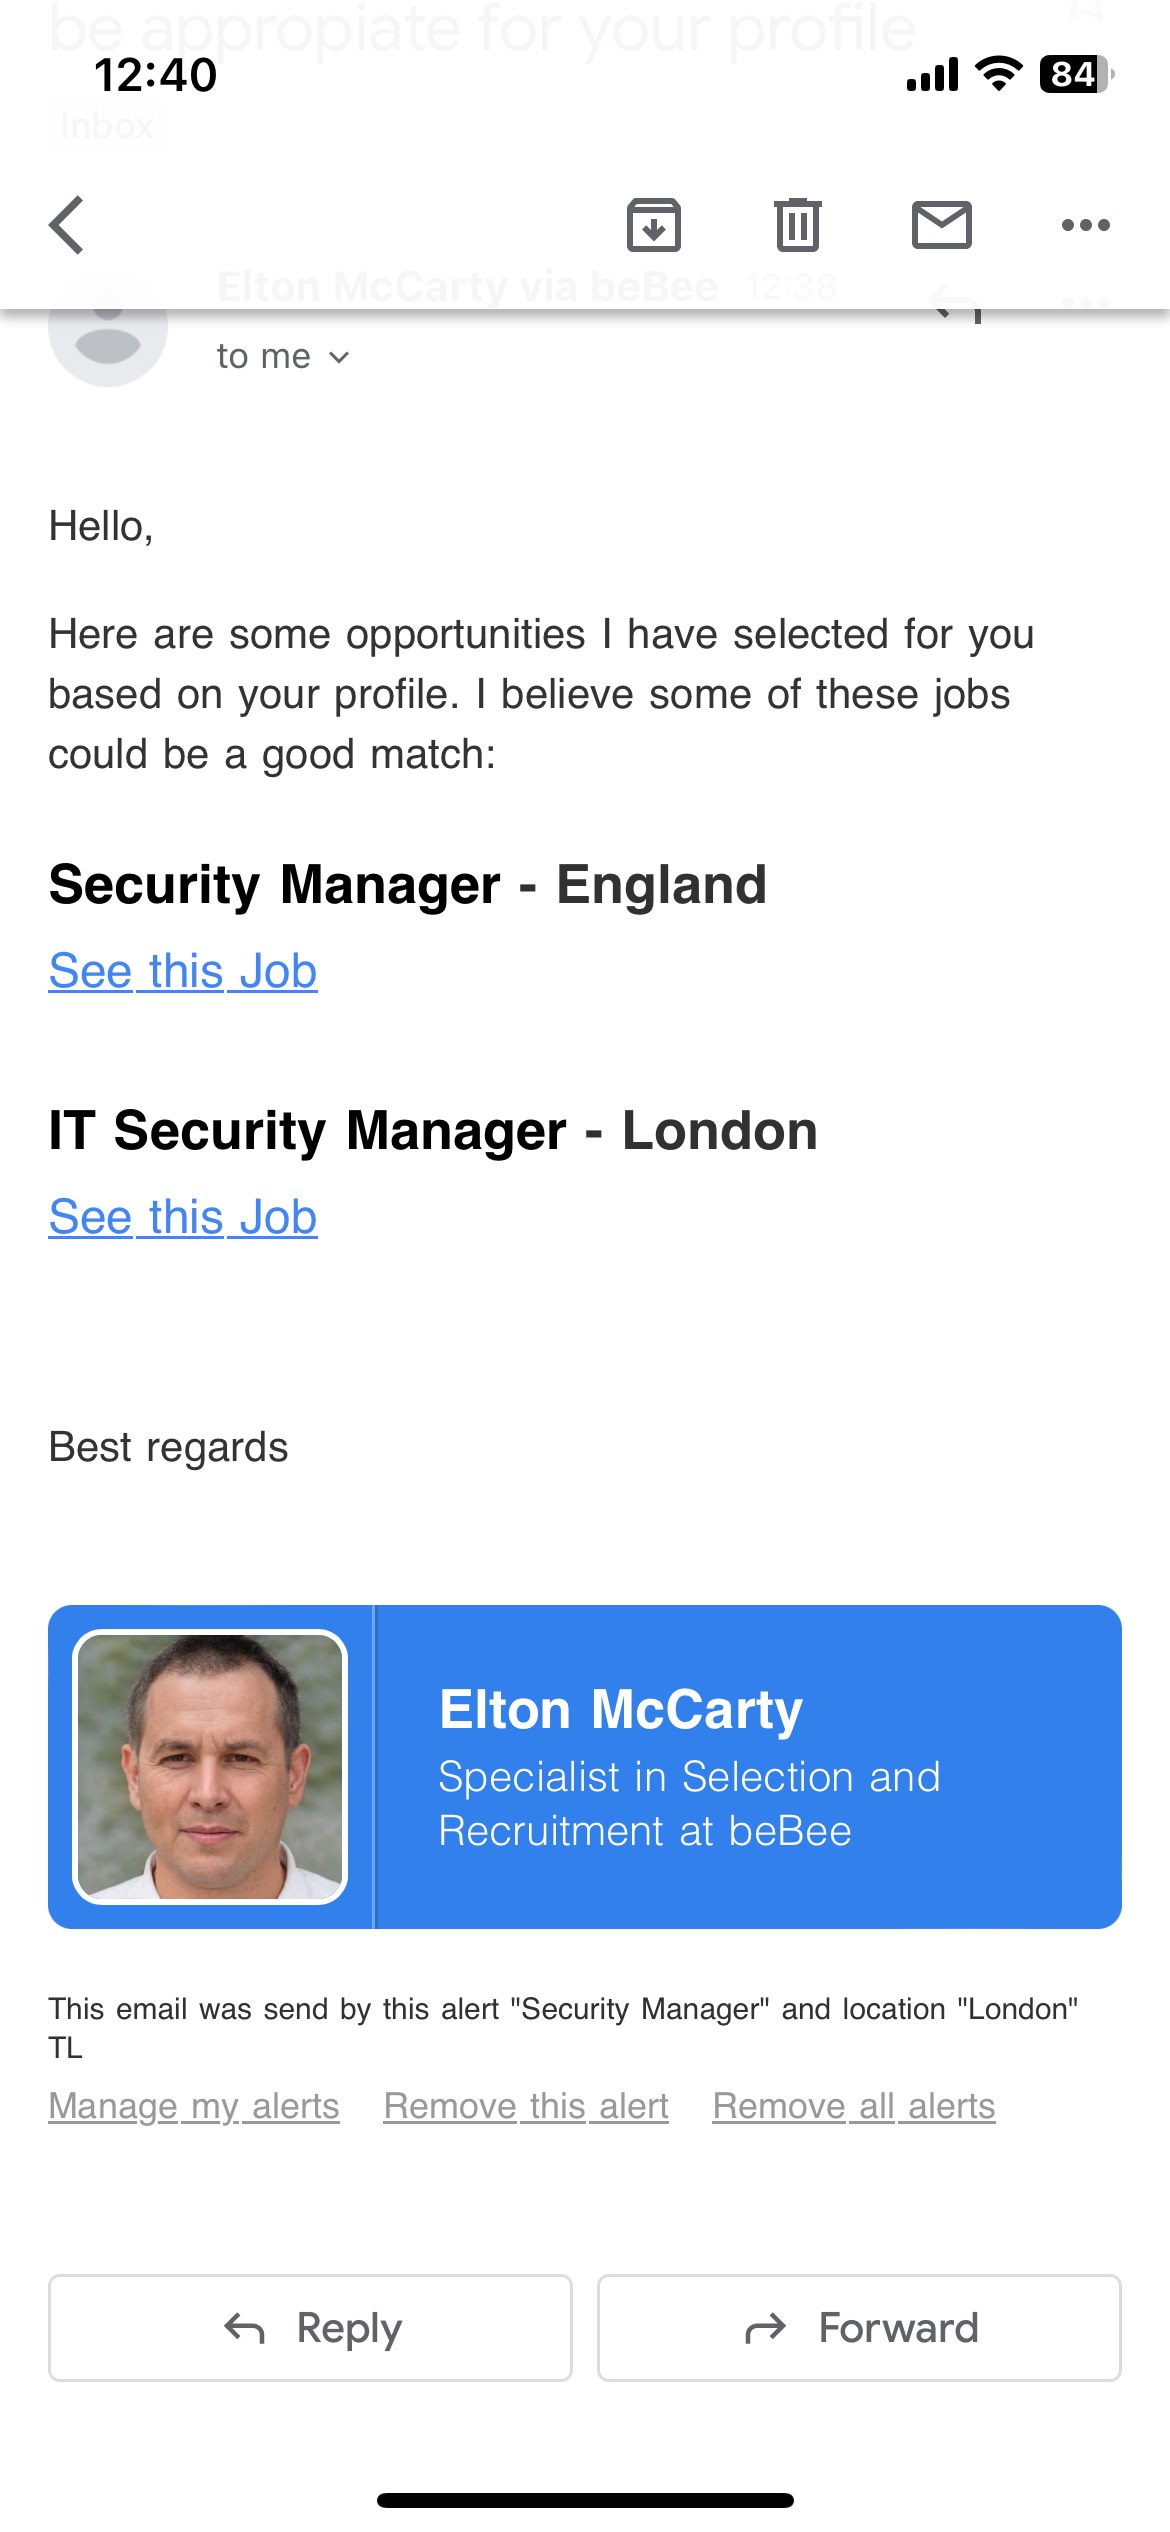 12:40 al TE

< BE 0 8 -

—— ~~
tome v
Hello,

Here are some opportunities | have selected for you
based on your profile. | believe some of these jobs
could be a good match:

Security Manager - England

See this Job
T Security Manager - London
See this Job

Best regards

Elton McCarty

Specialist in Selection and
Recruitment at beBee

 

This email was send by this alert "Security Manager" and location "London"
TL

Manage my alerts Remove this alert Remove all alerts

€ Reply ~> Forward